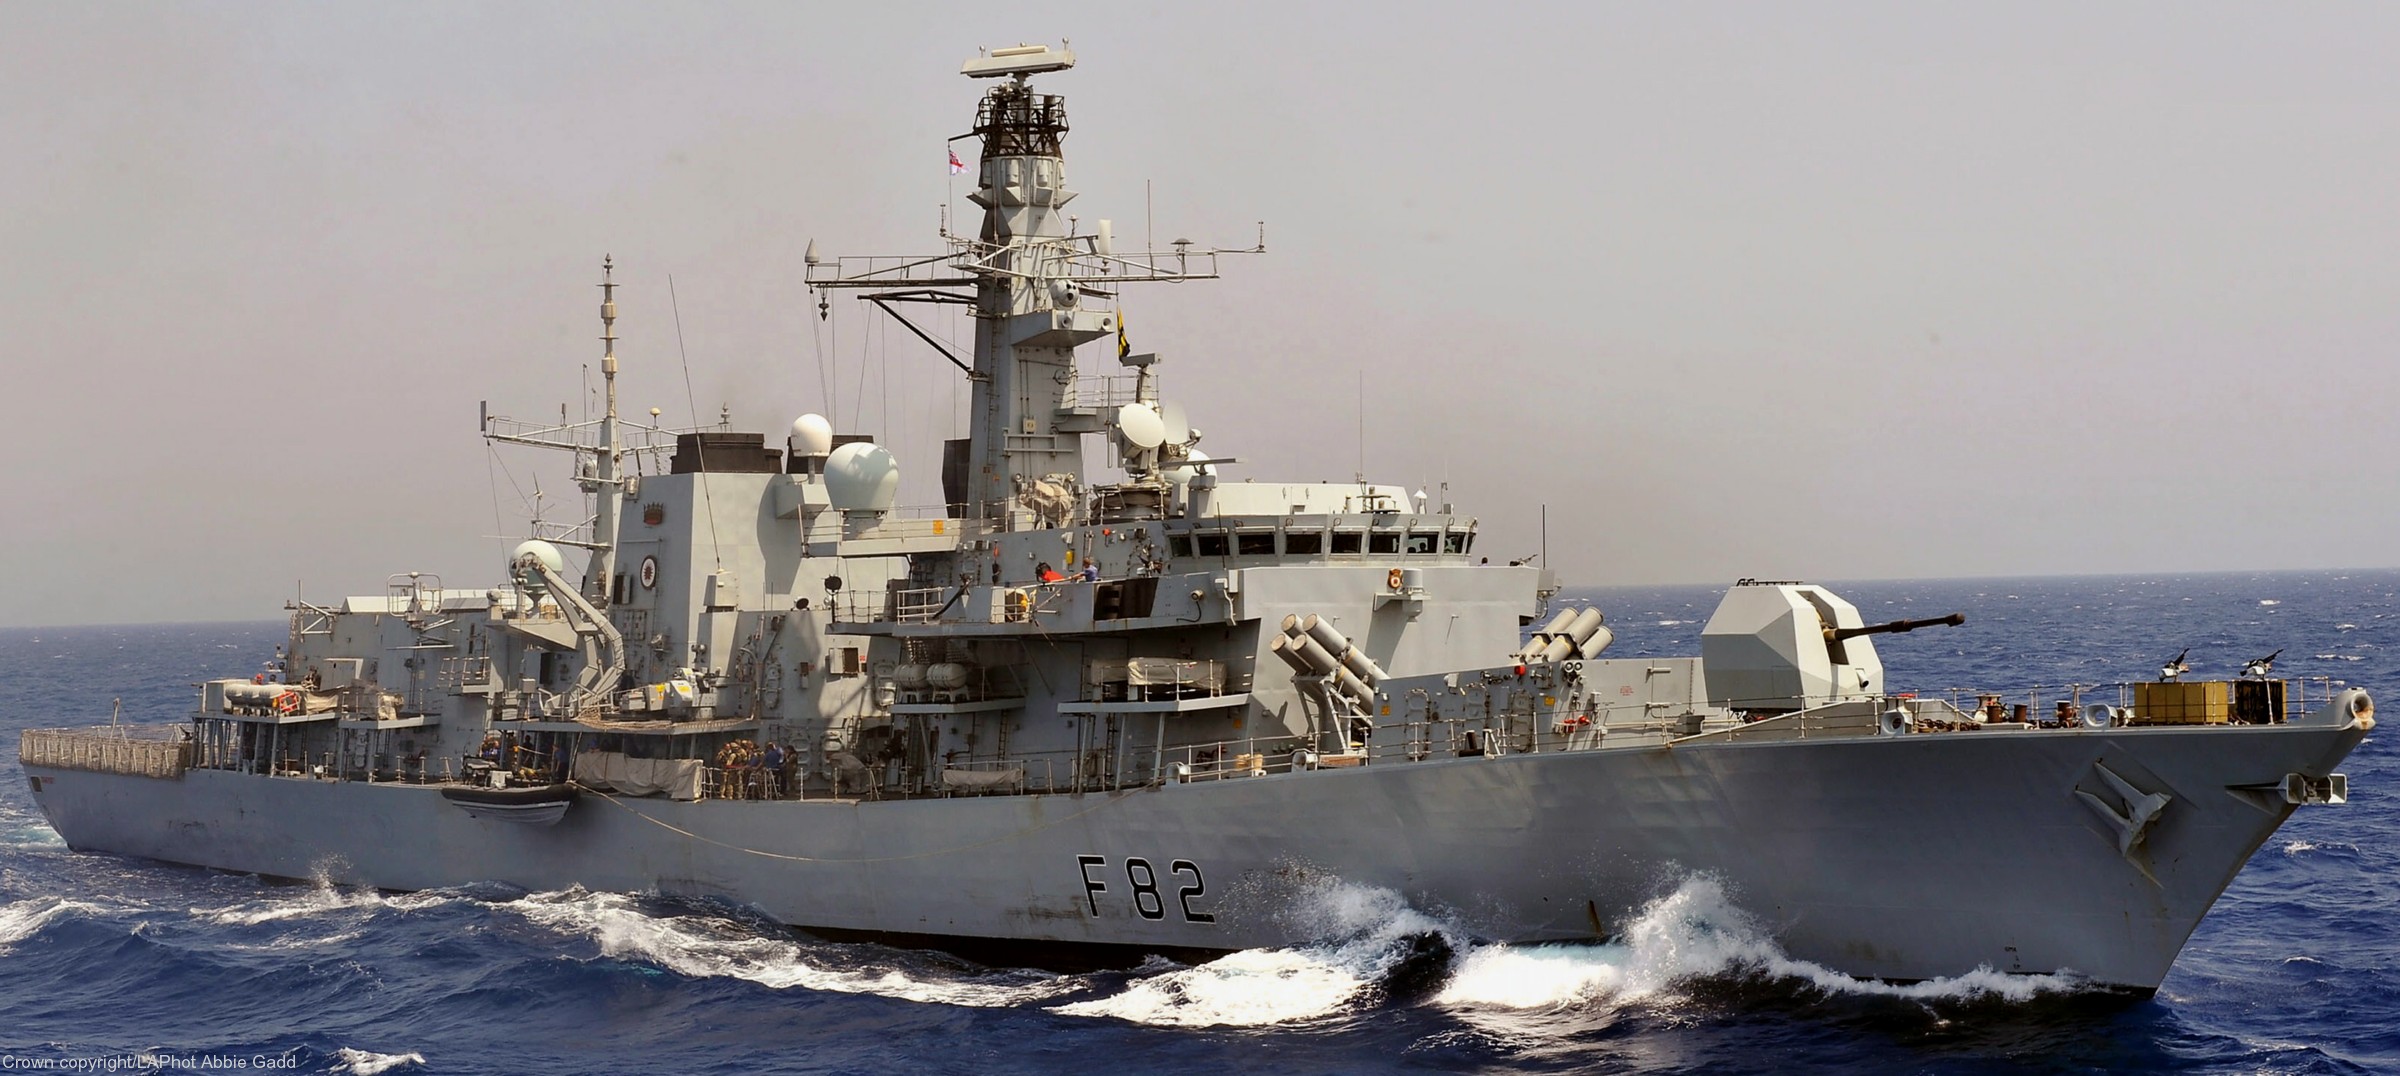 f-82 hms somerset type 23 duke class guided missile frigate ffg royal navy 03